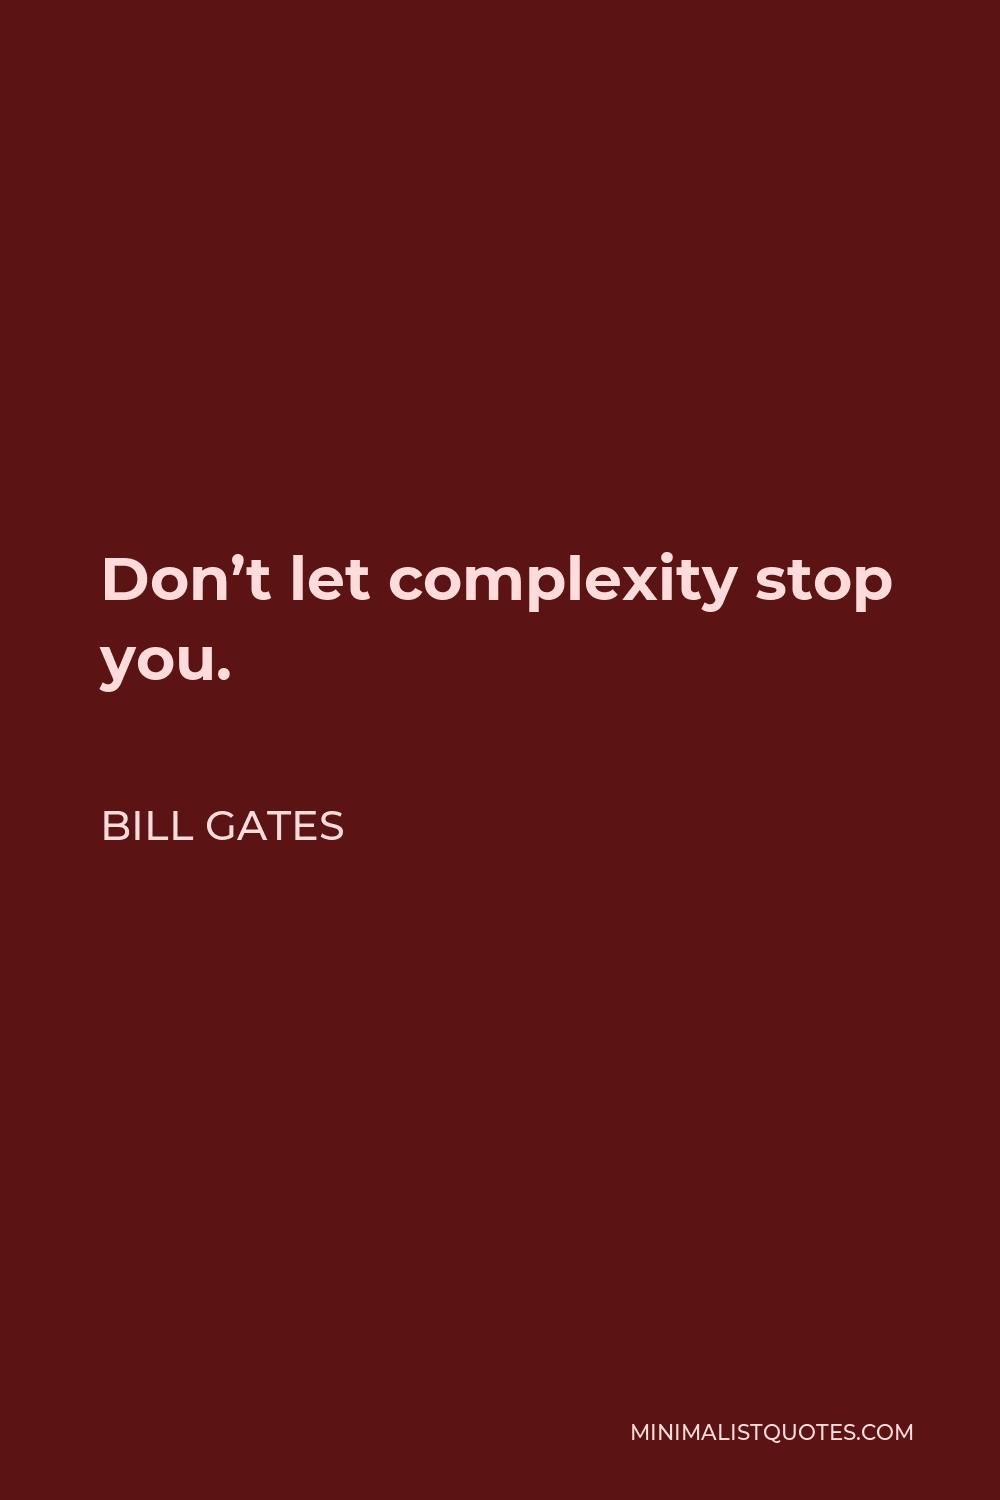 Bill Gates Quote - Don’t let complexity stop you.